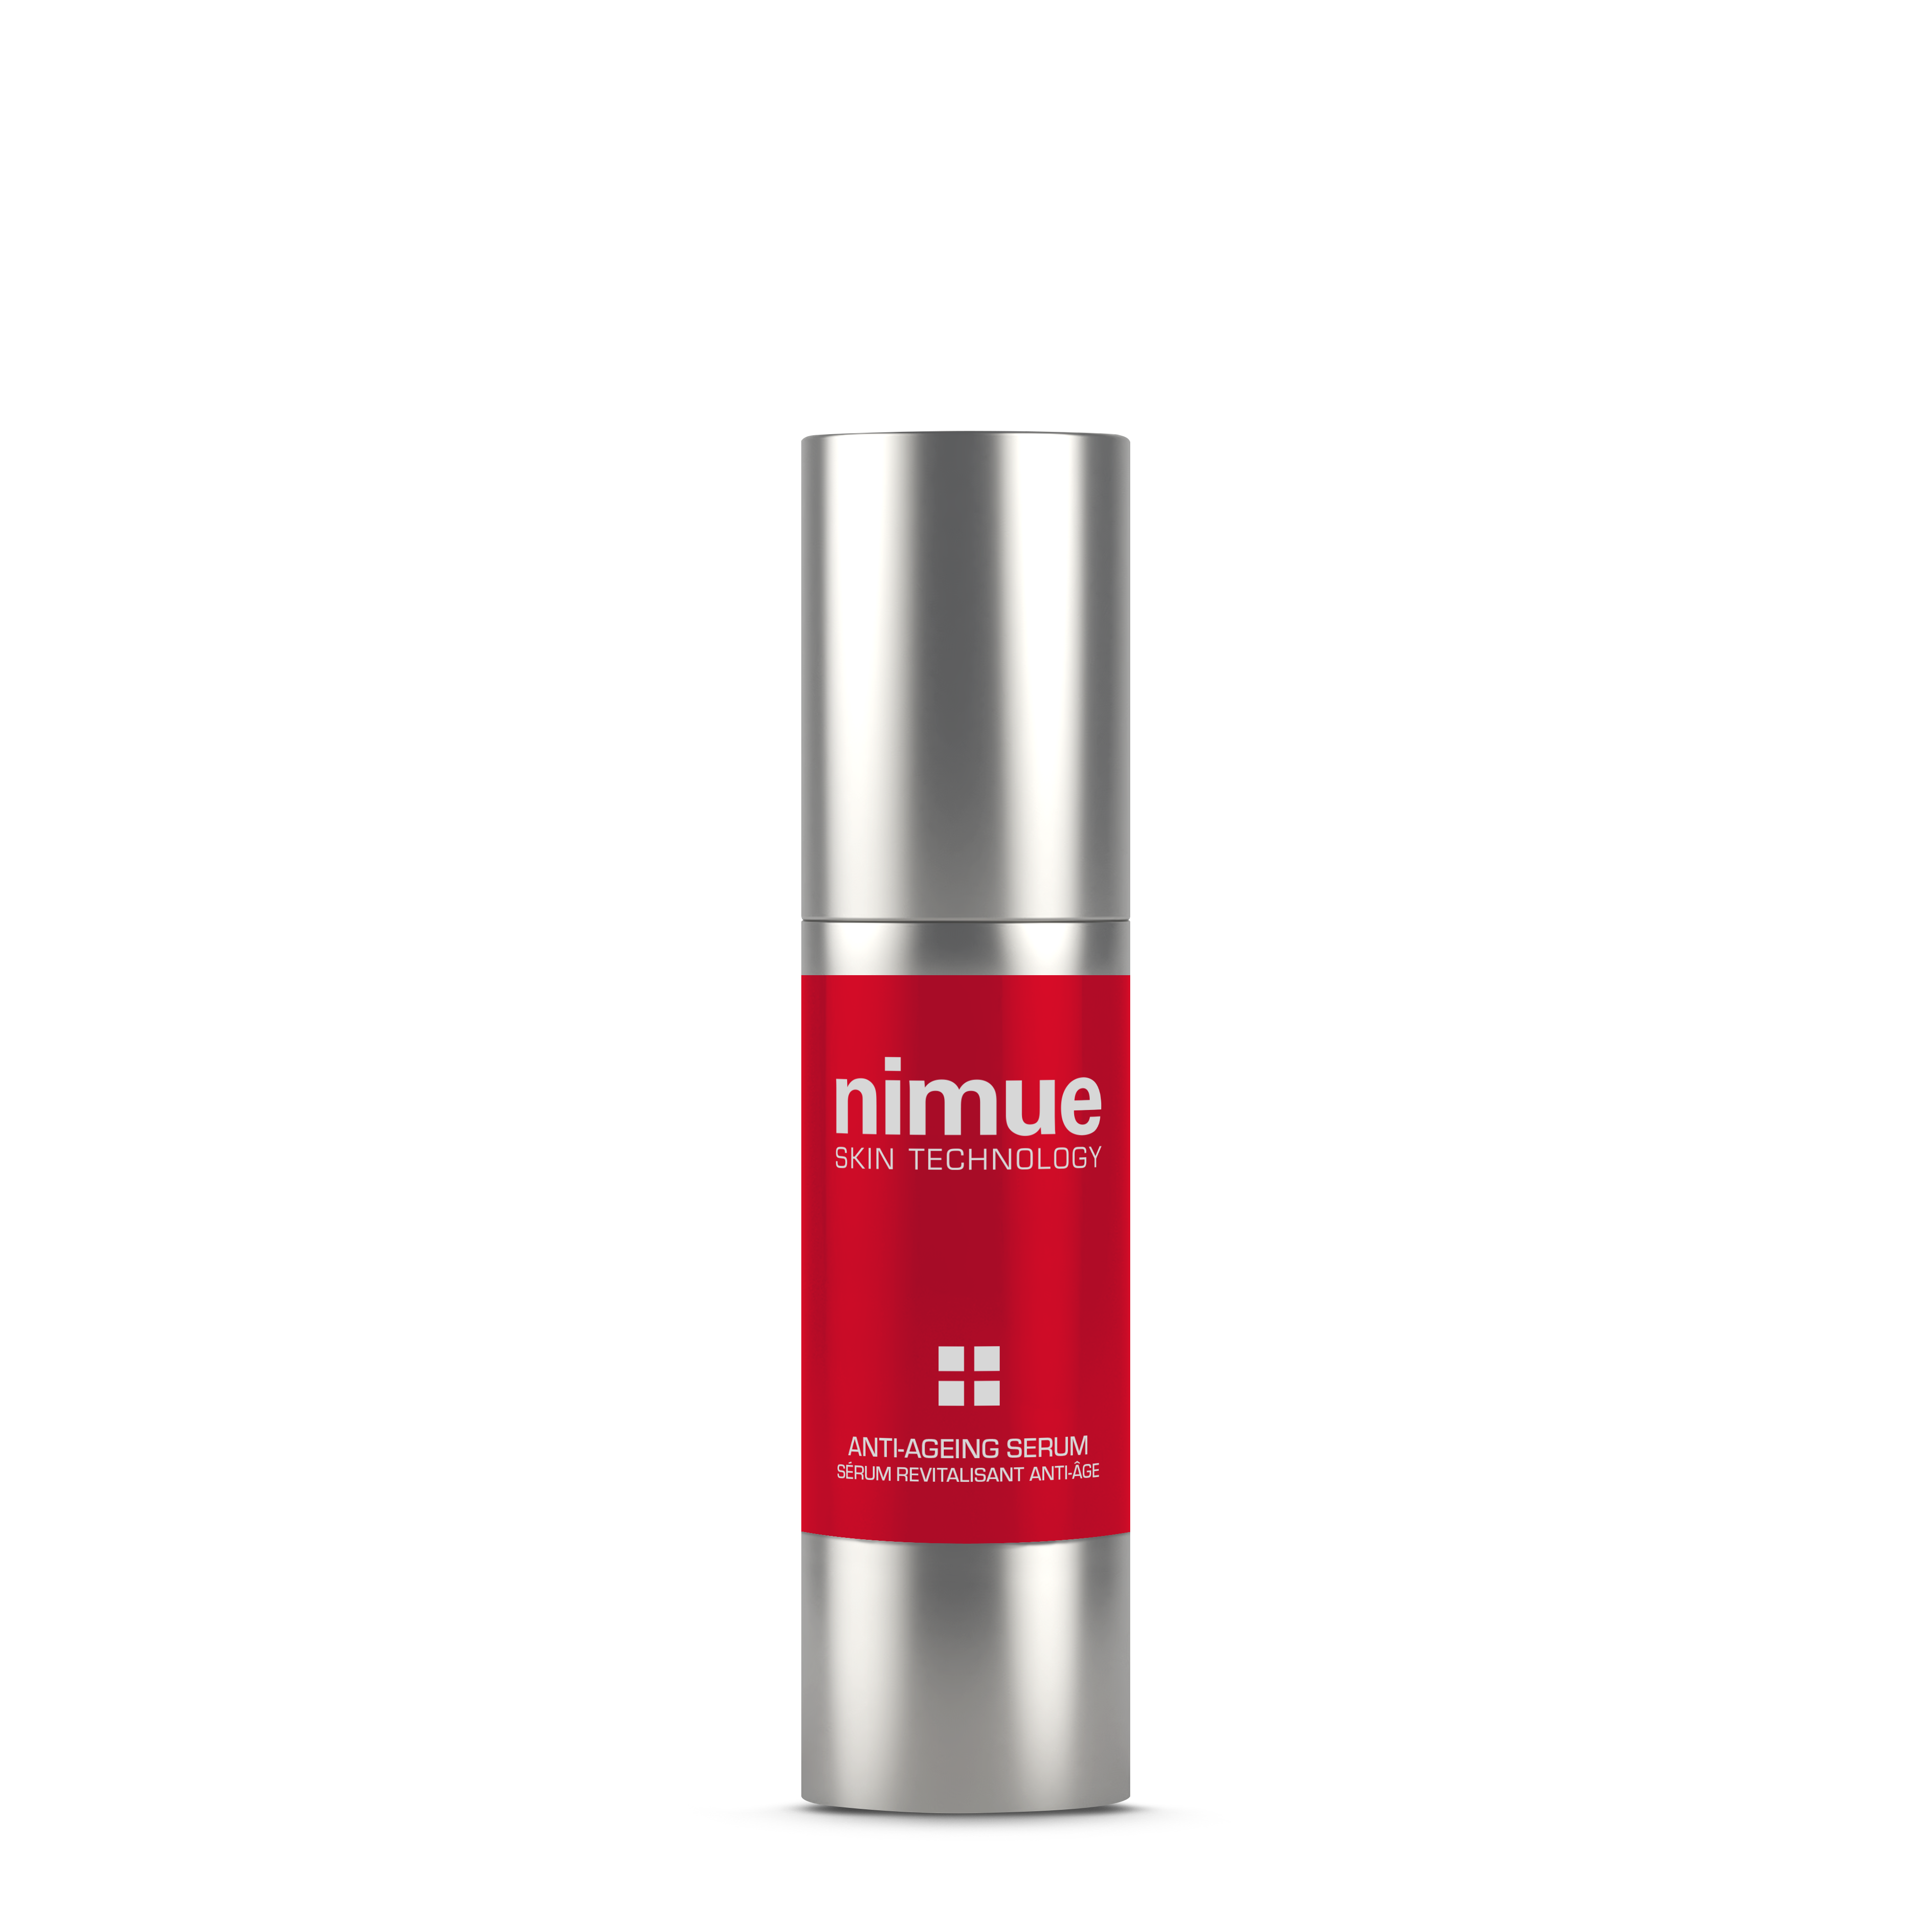 A bottle of Nimue - Anti-Ageing Serum 30ml on a white background.